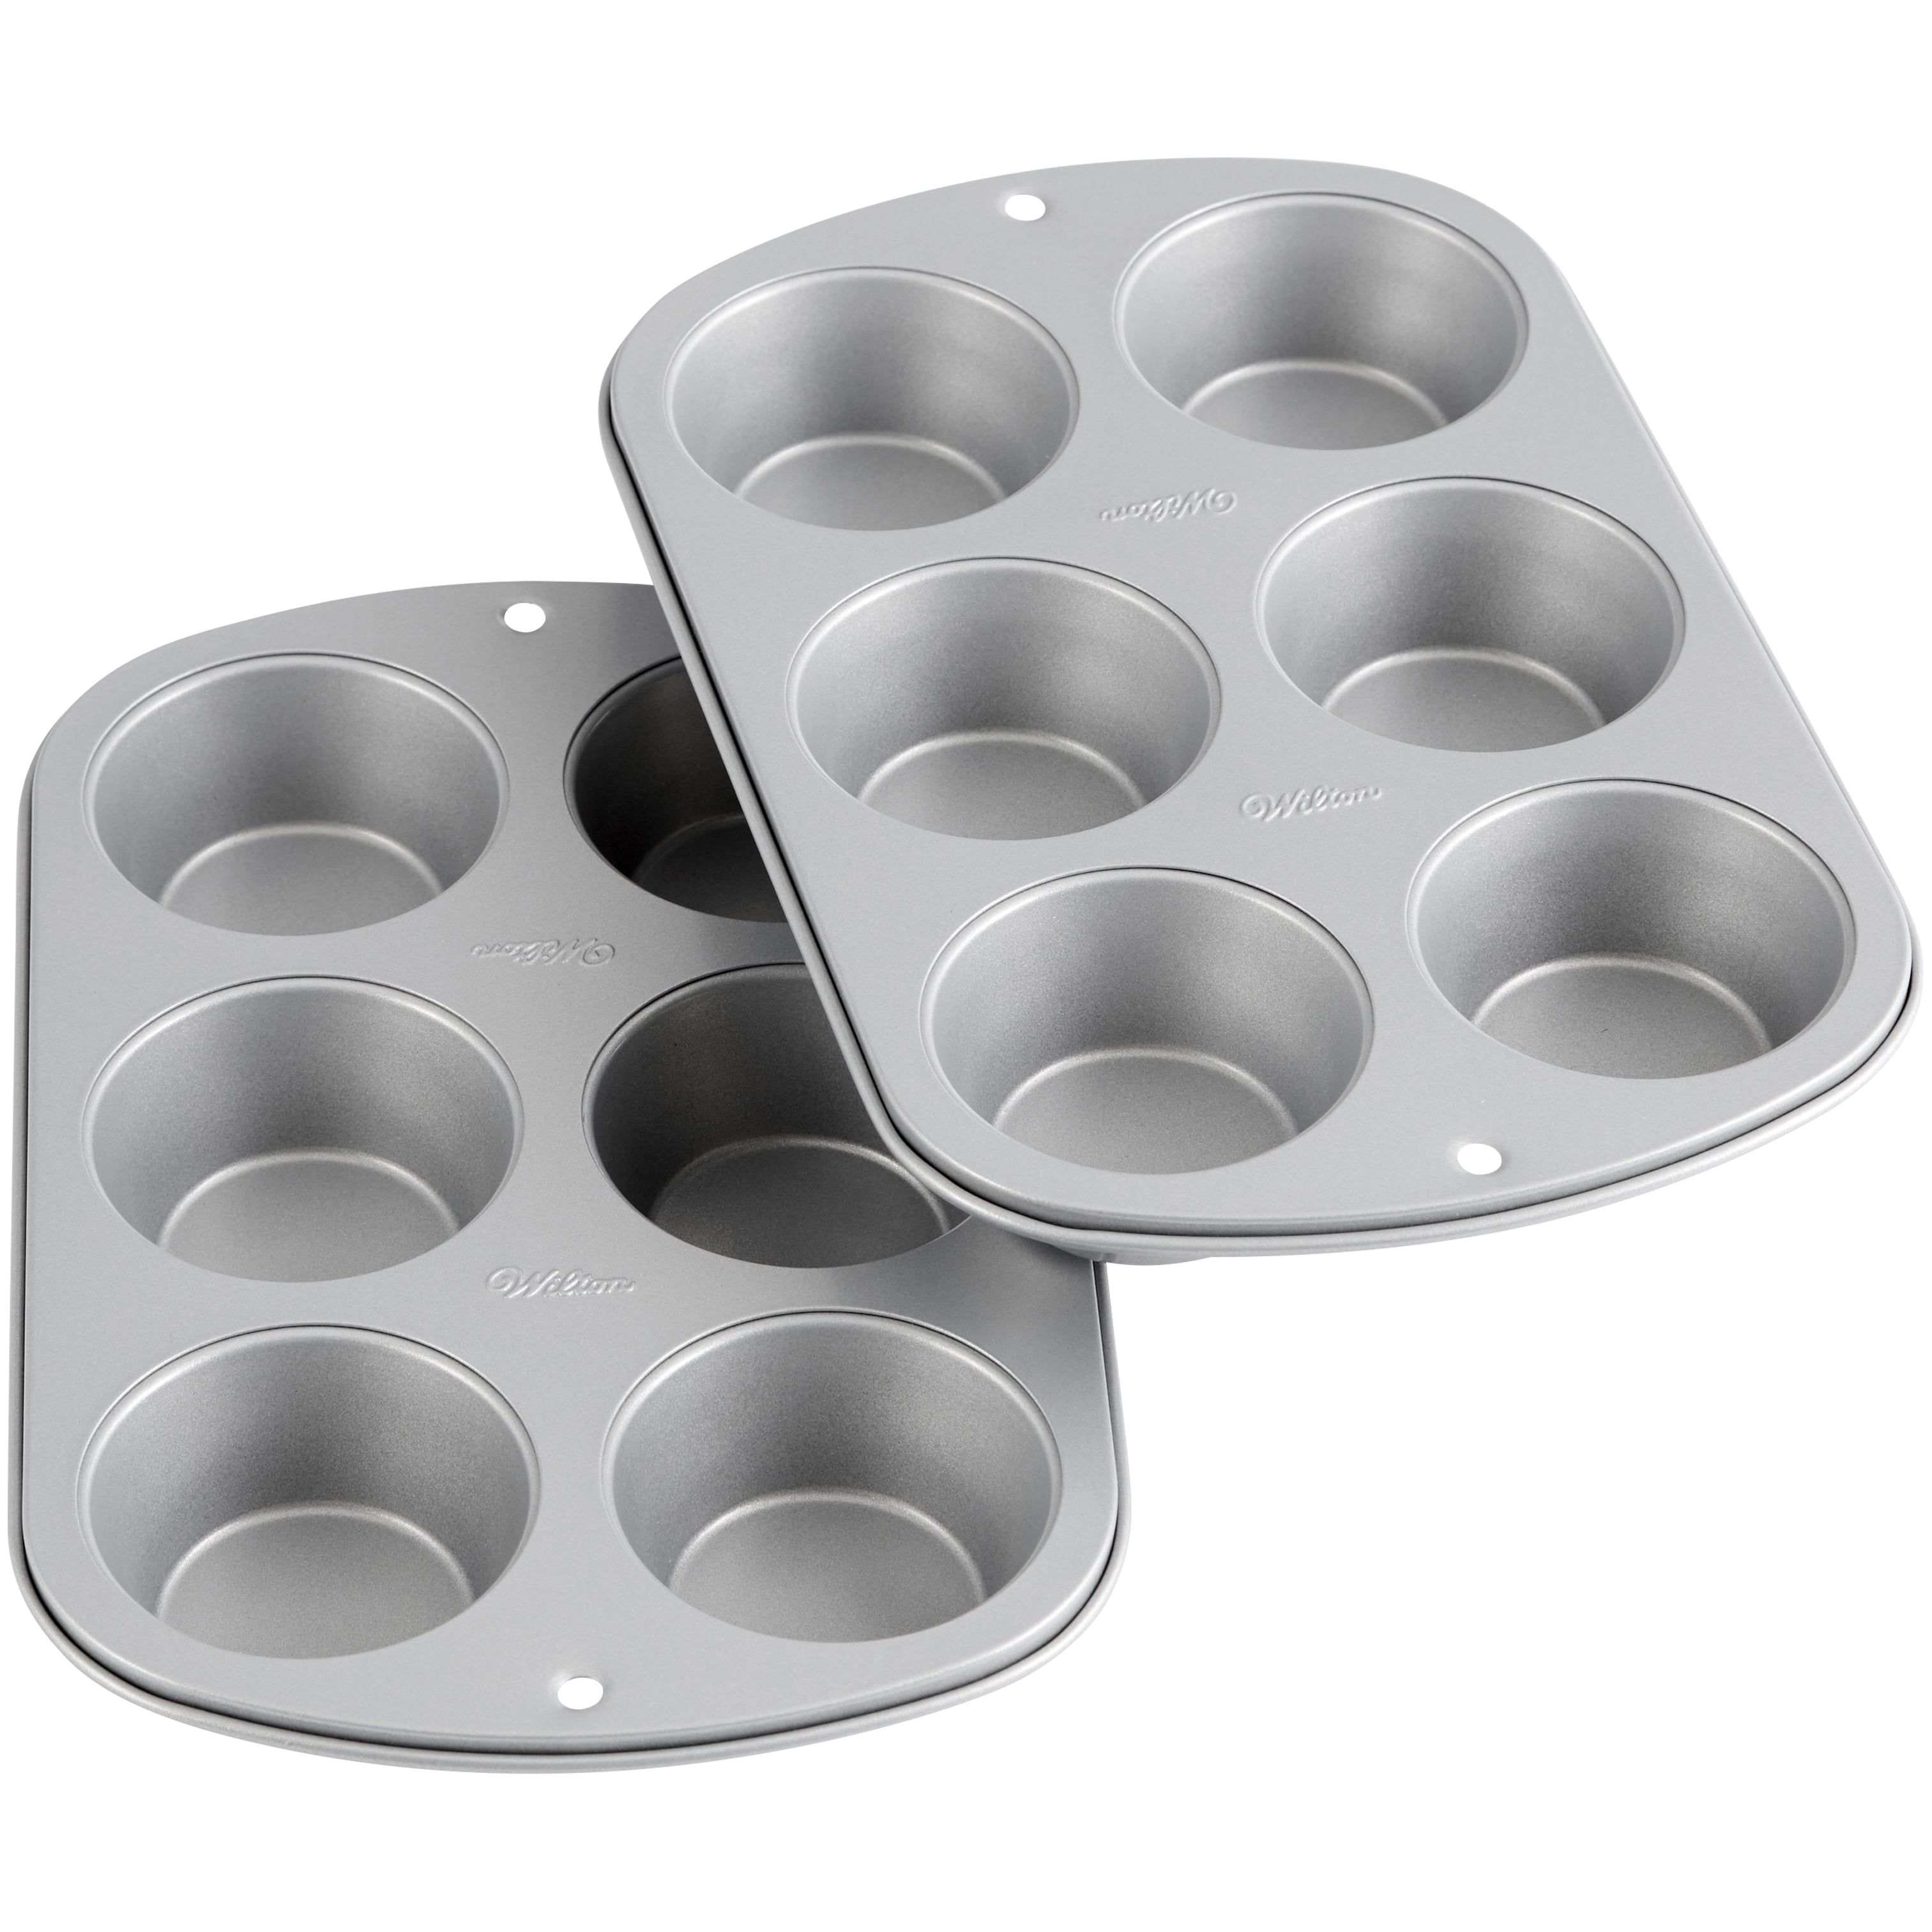 Nonstick Bakeware 6-Cup Muffin Pan with Silicone Cupcake Liners (Set of 6) by Boxiki Kitchen | Premium Nonstick Baking Muffin Tin and Muffin Cups